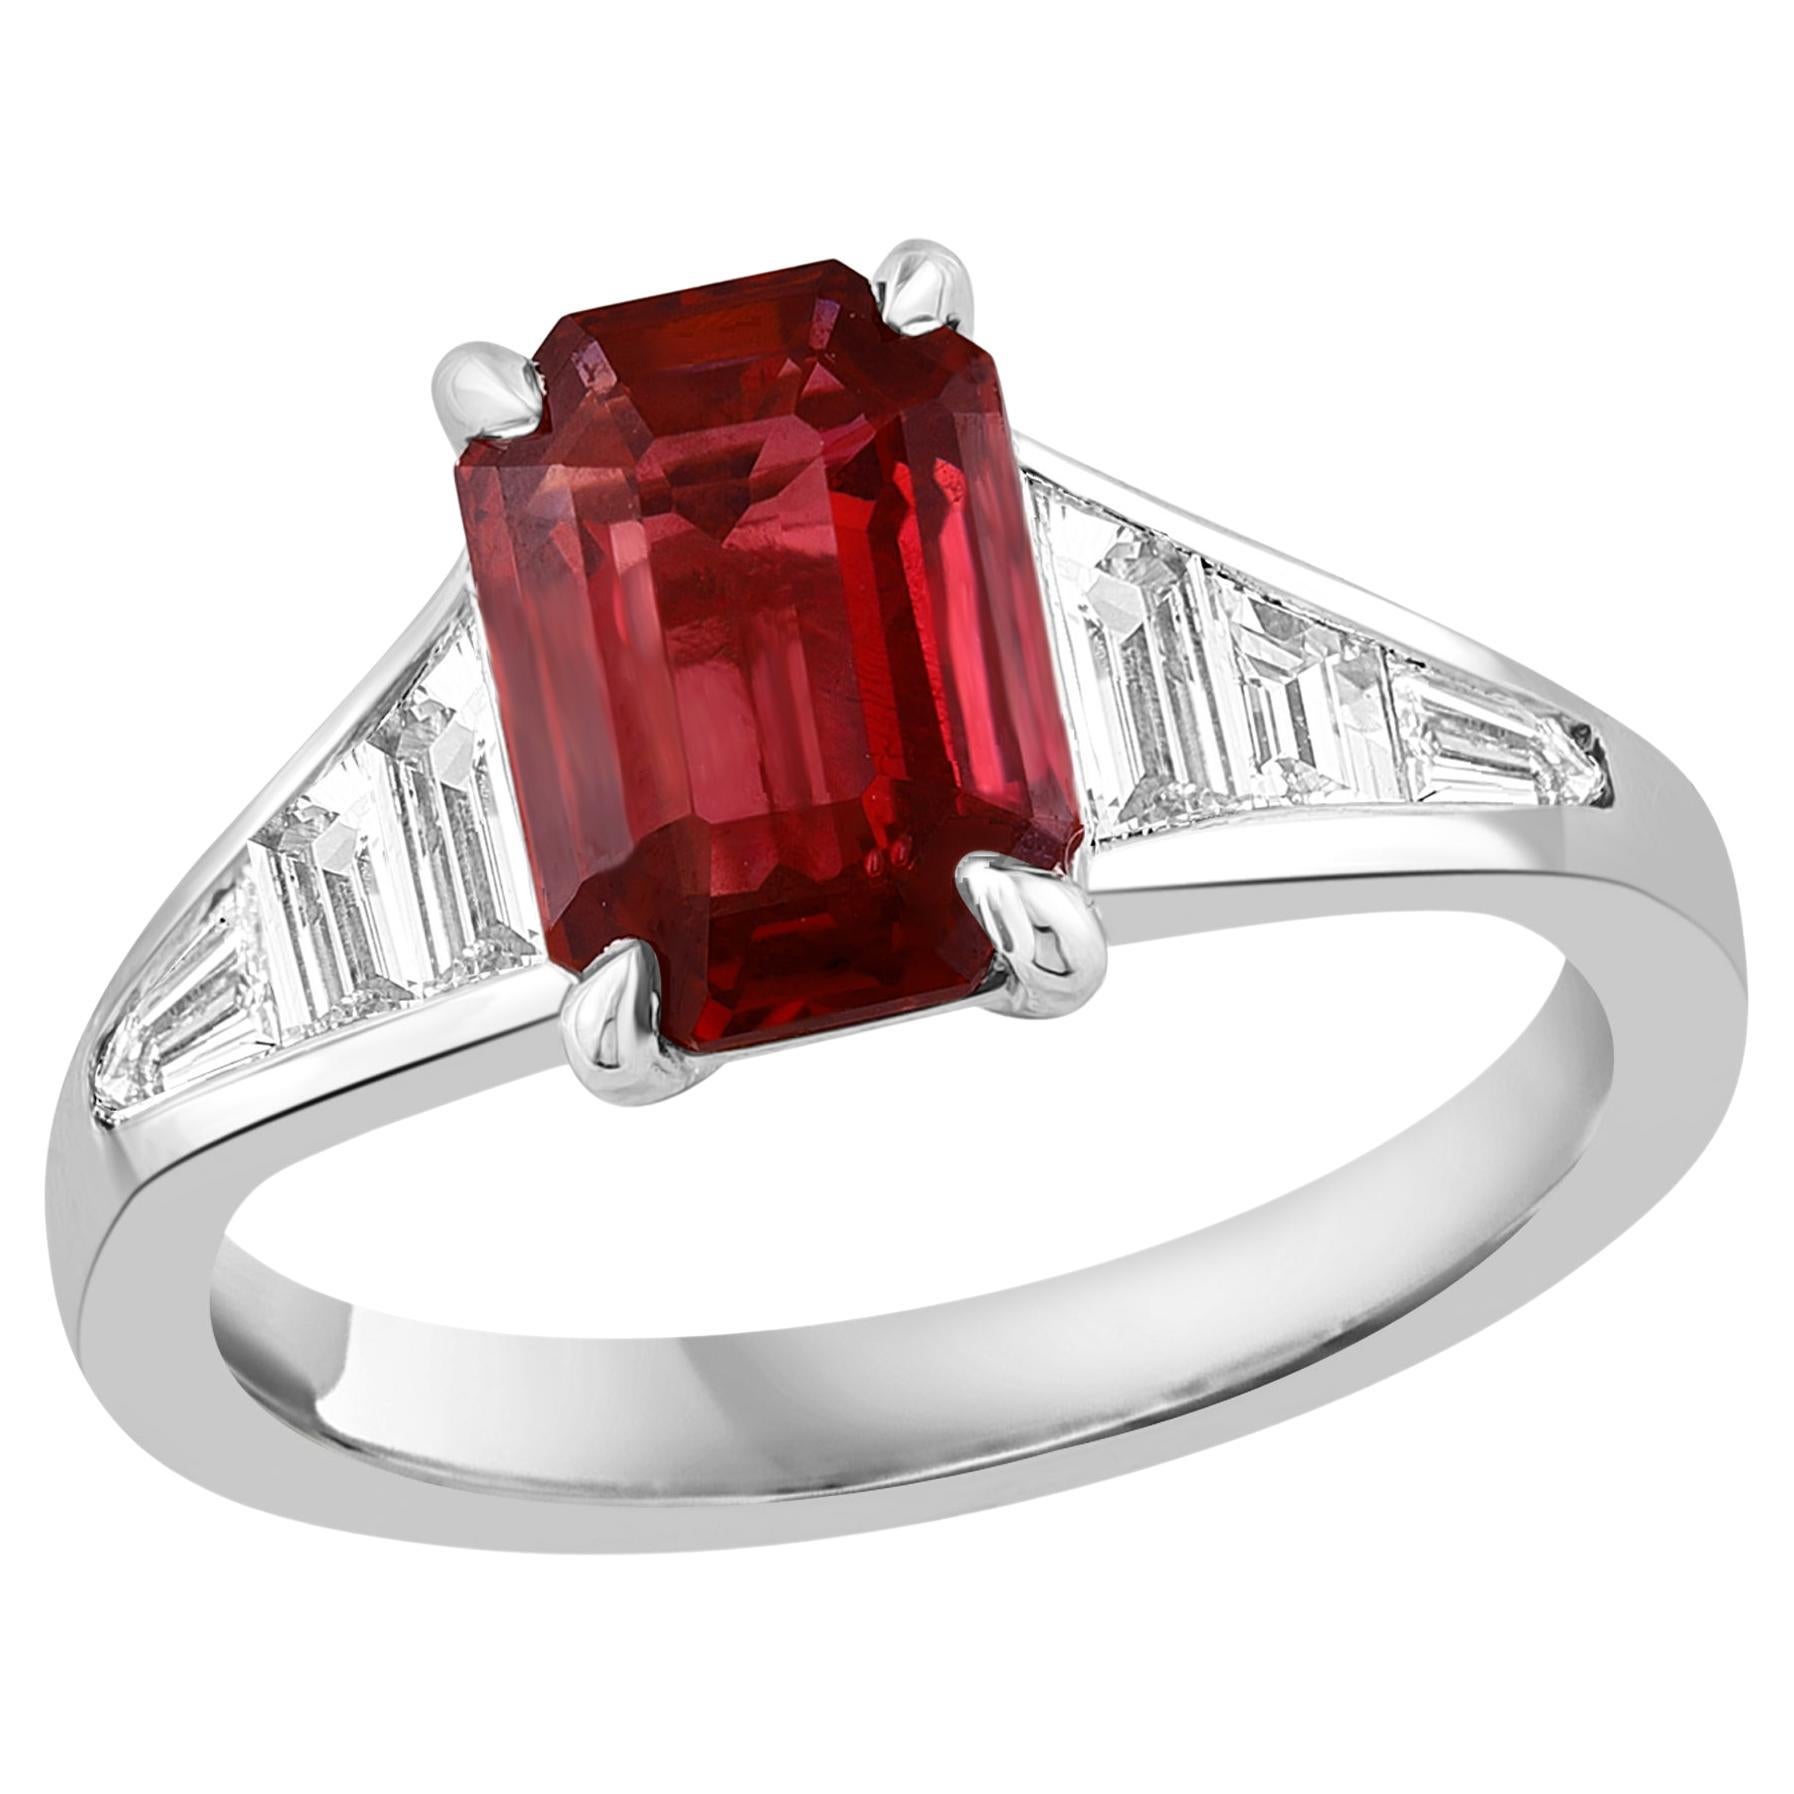 Certified 2.08 Carat Emerald Cut Natural Ruby and Diamond Ring in Platinum